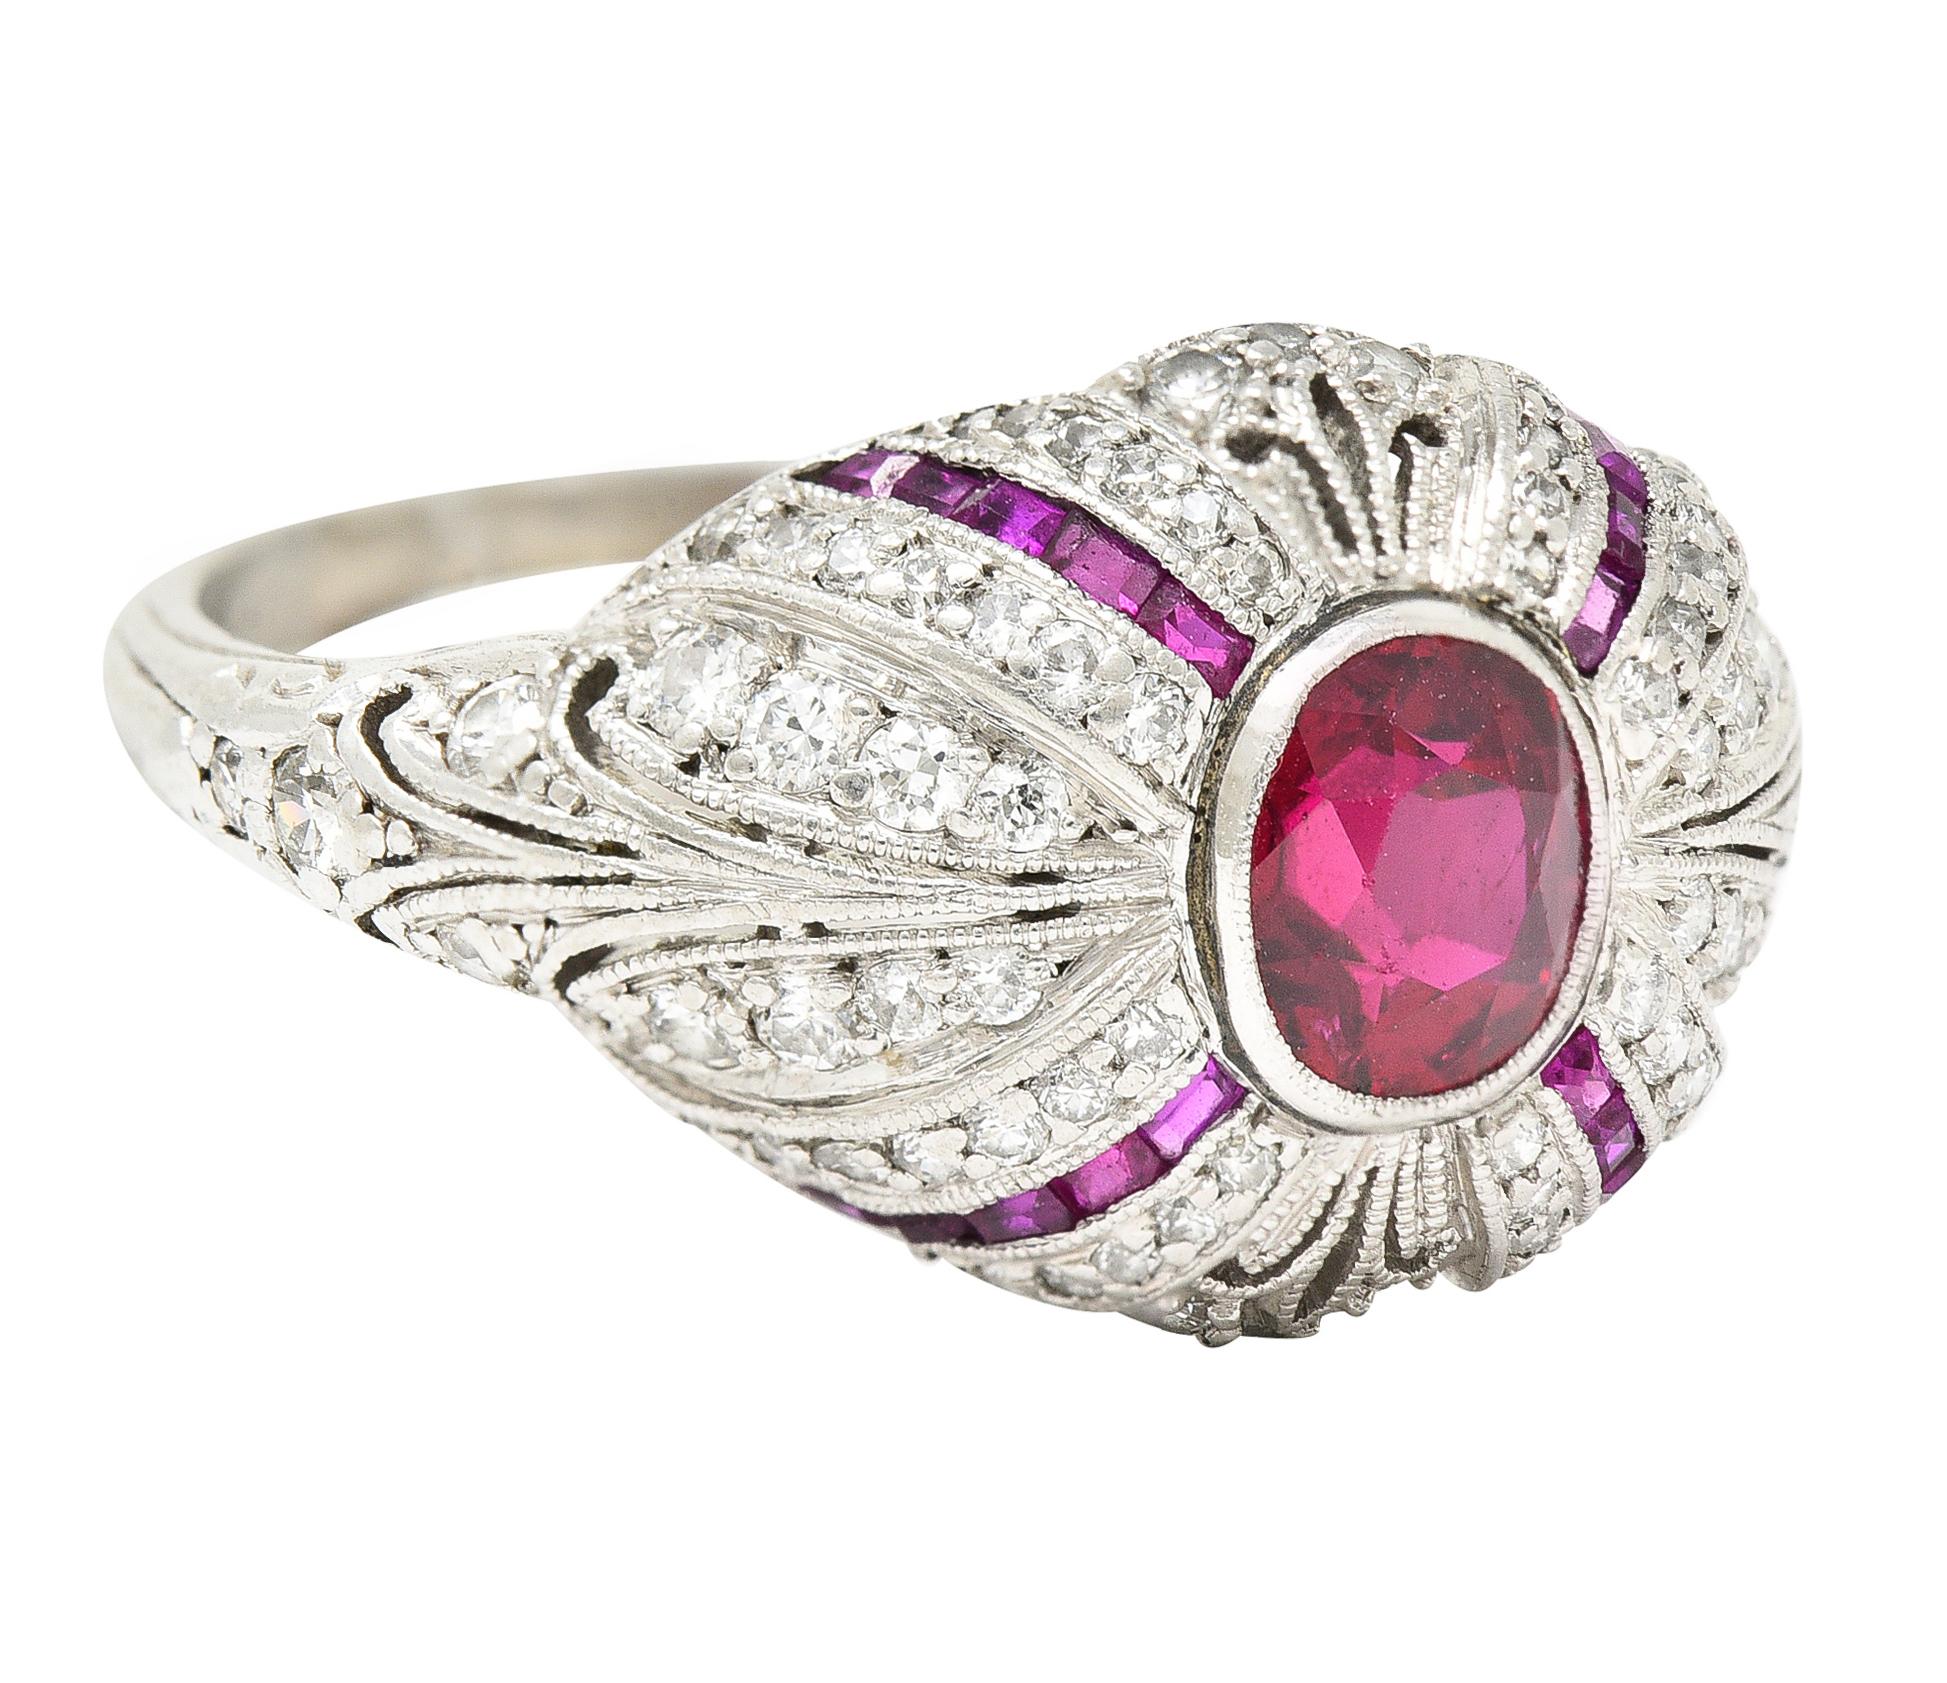 Bombé band ring is pierced with a scroll motif accented by milgrain edges. Centering an oval cut ruby weighing approximately 1.00 carat. Transparent with vivid red color and no indications of heat. Bezel set low in mounting with four channels of